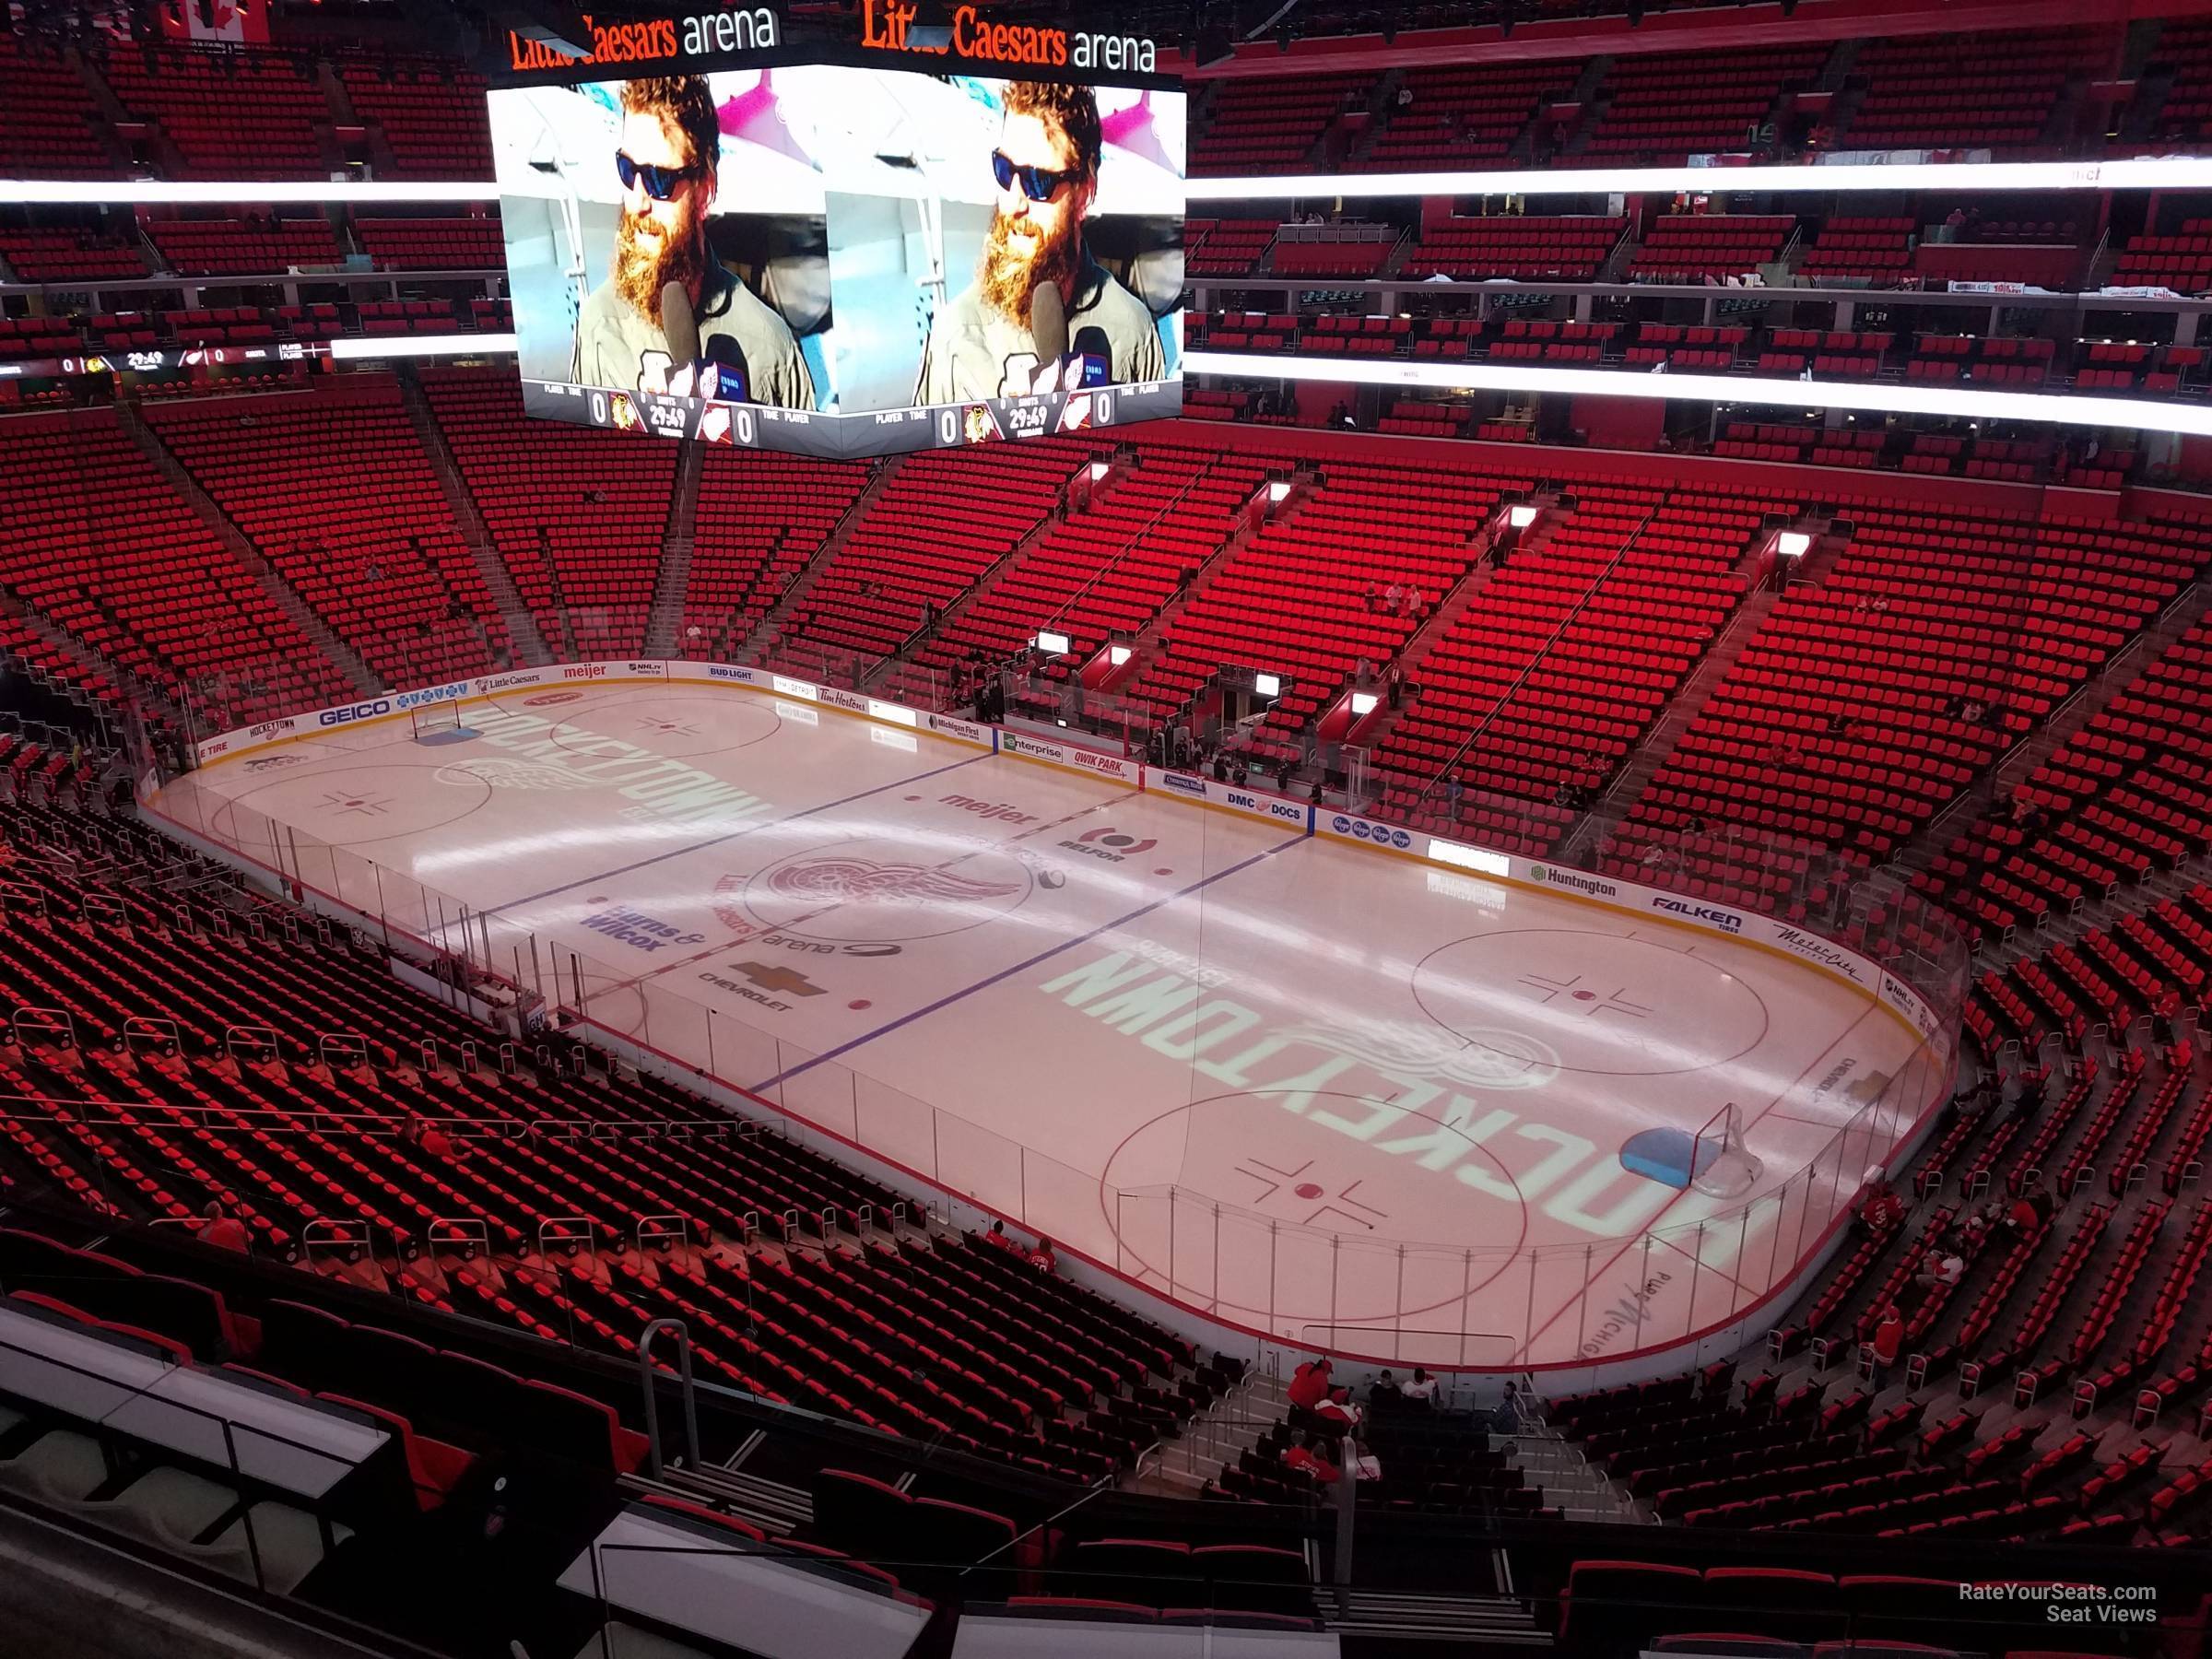 Every game, event and concert at Little Caesars Arena in 2018 